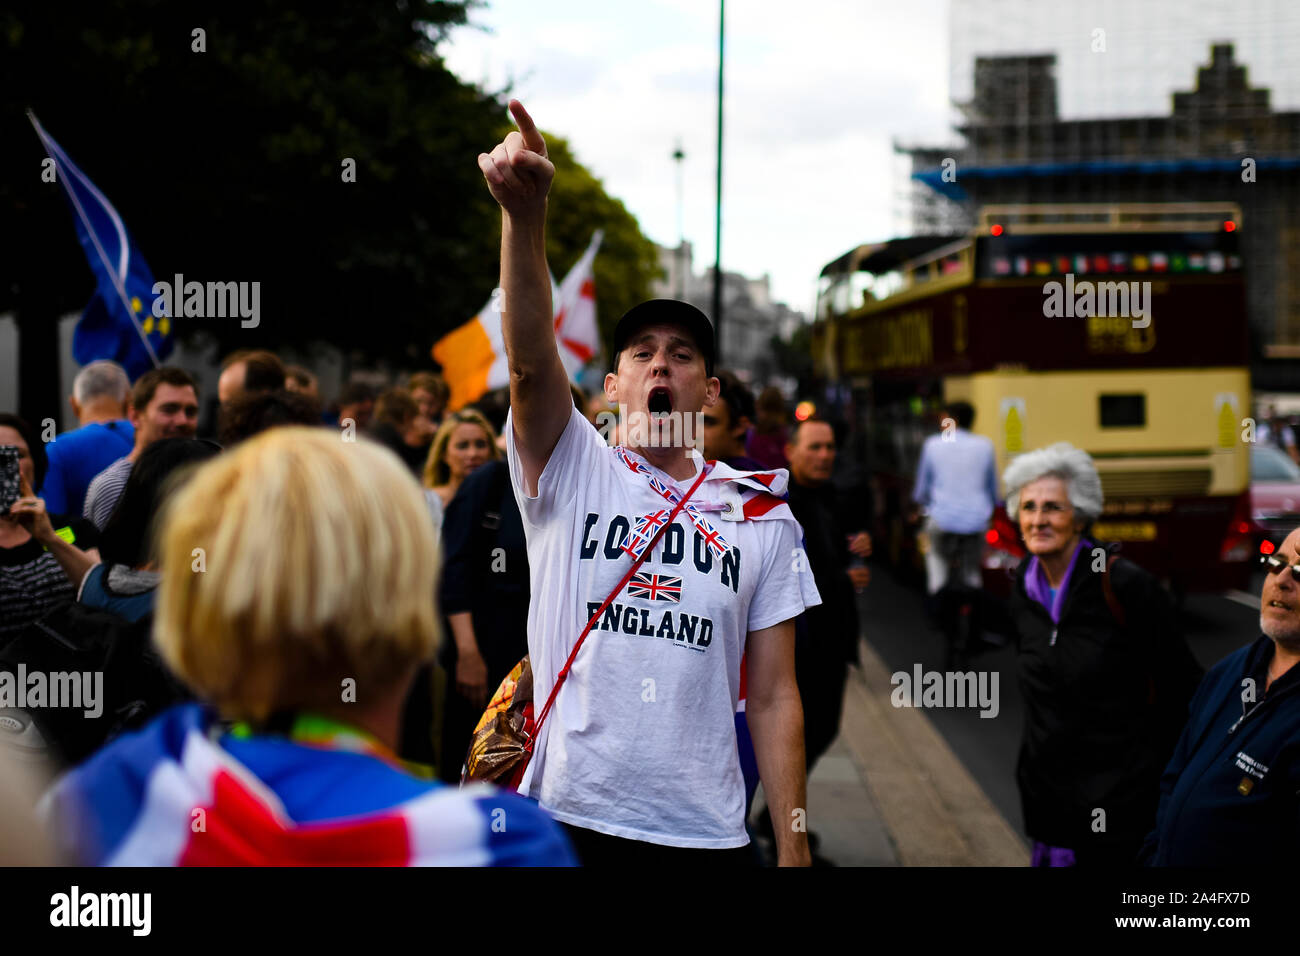 London, UK. A pro-leave protester wearing a Union flag points in the air as he loudly vocalises his support for leaving the EU. Stock Photo